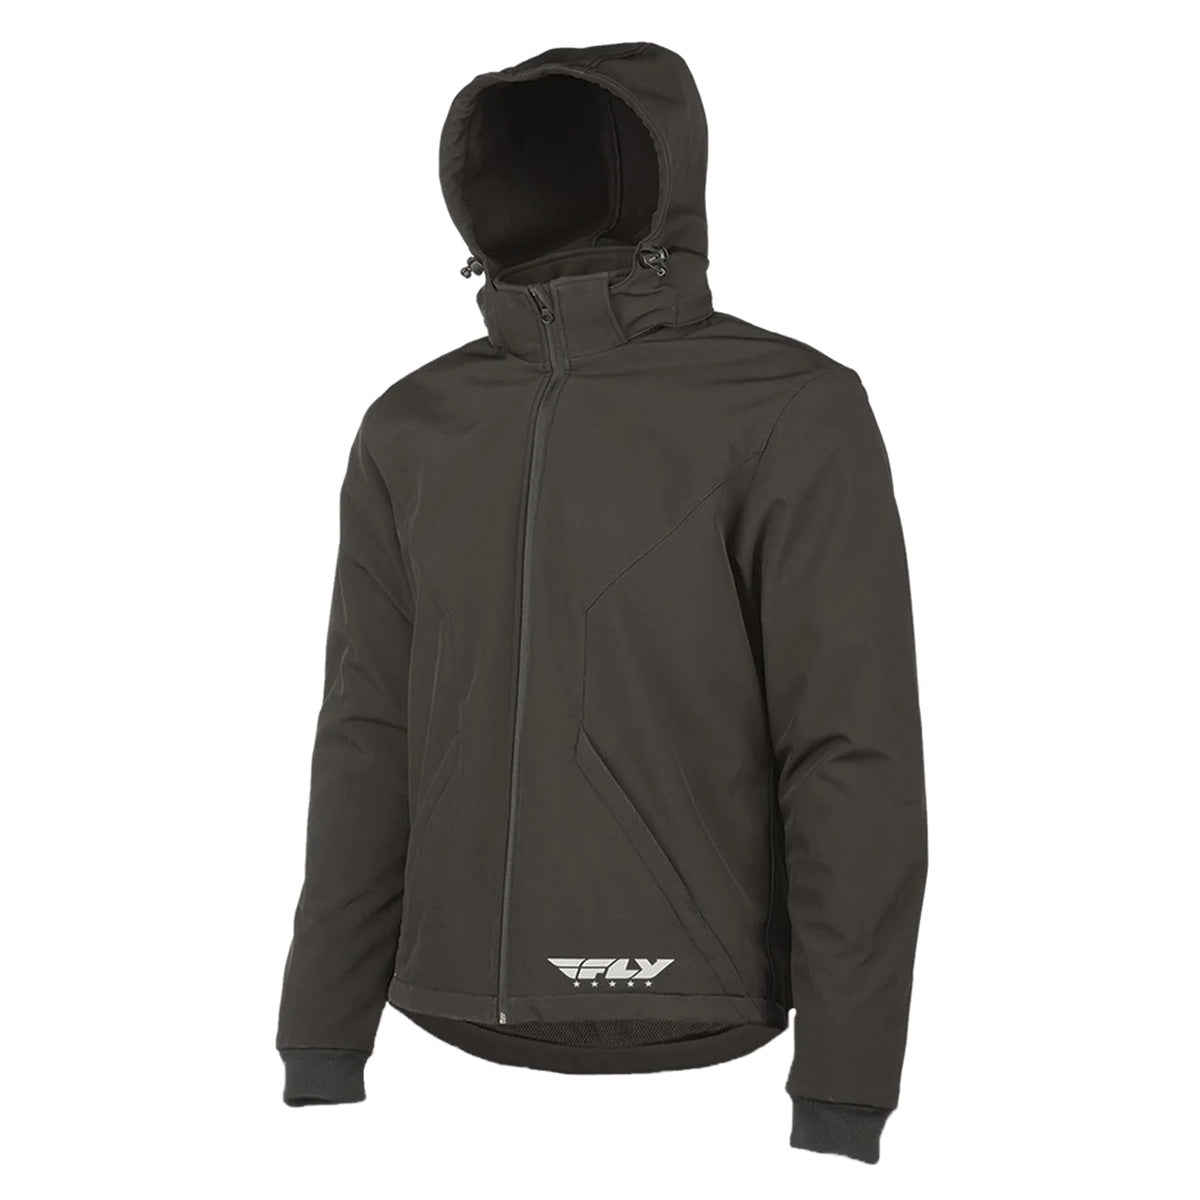 Fly Racing Armored Tech Hoodie Men's Street Jackets